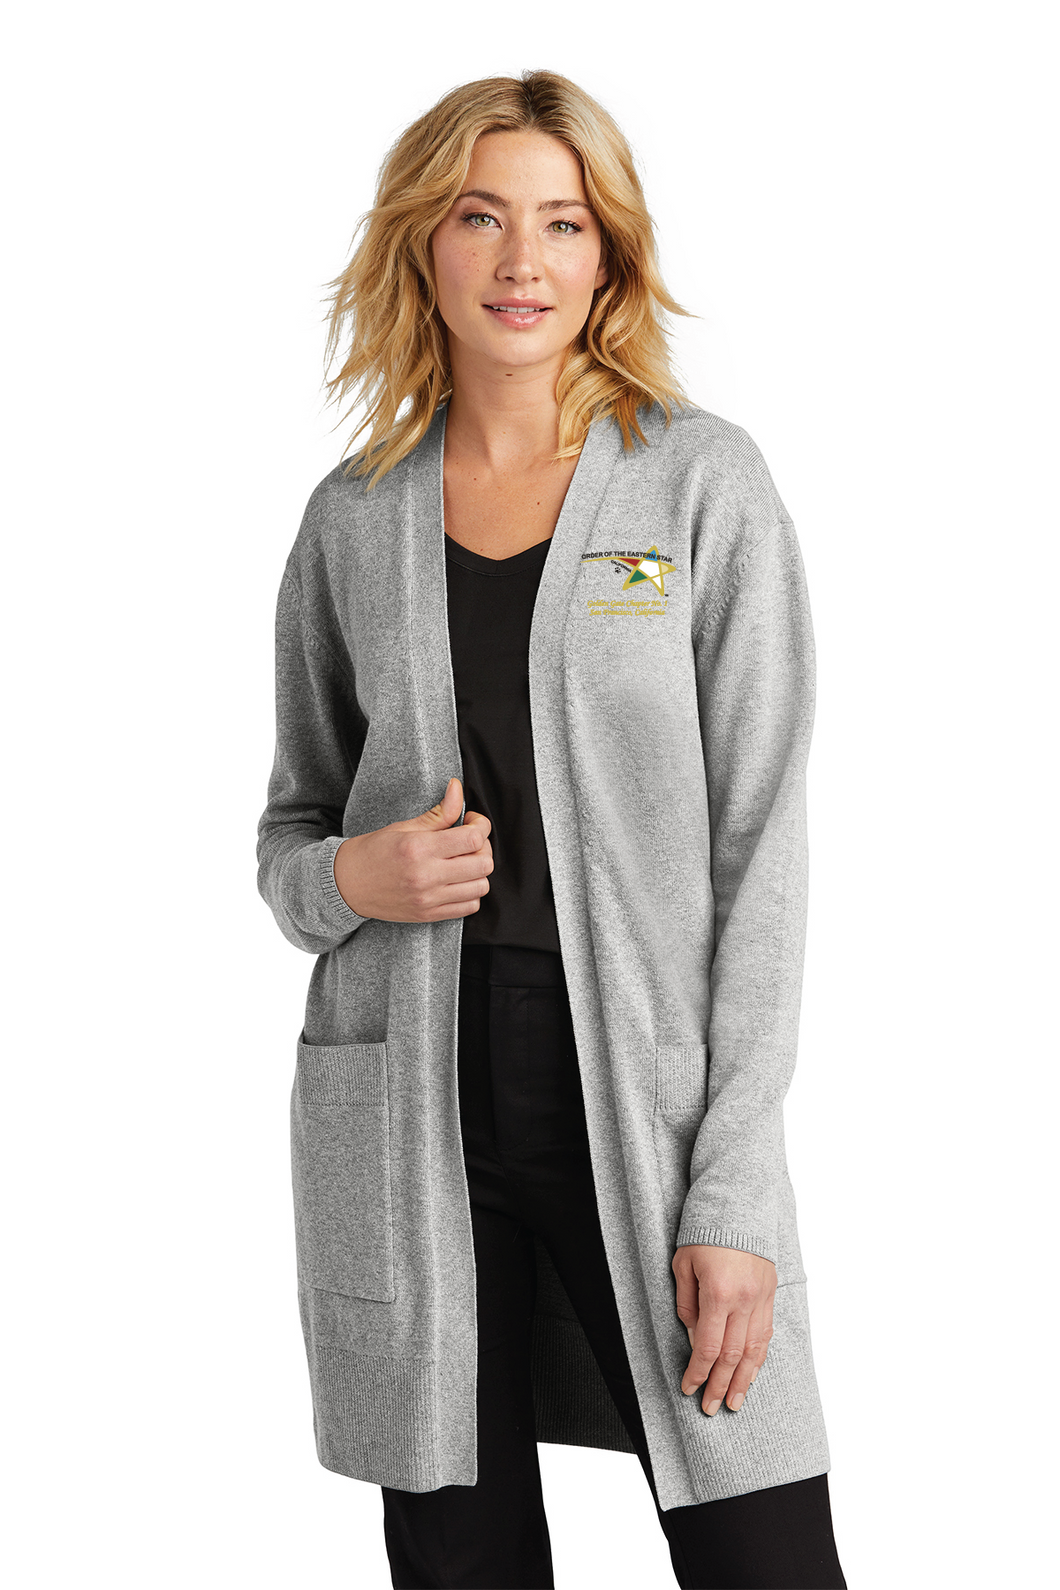 OES Golden Gate Chapter Ladies Cardigan